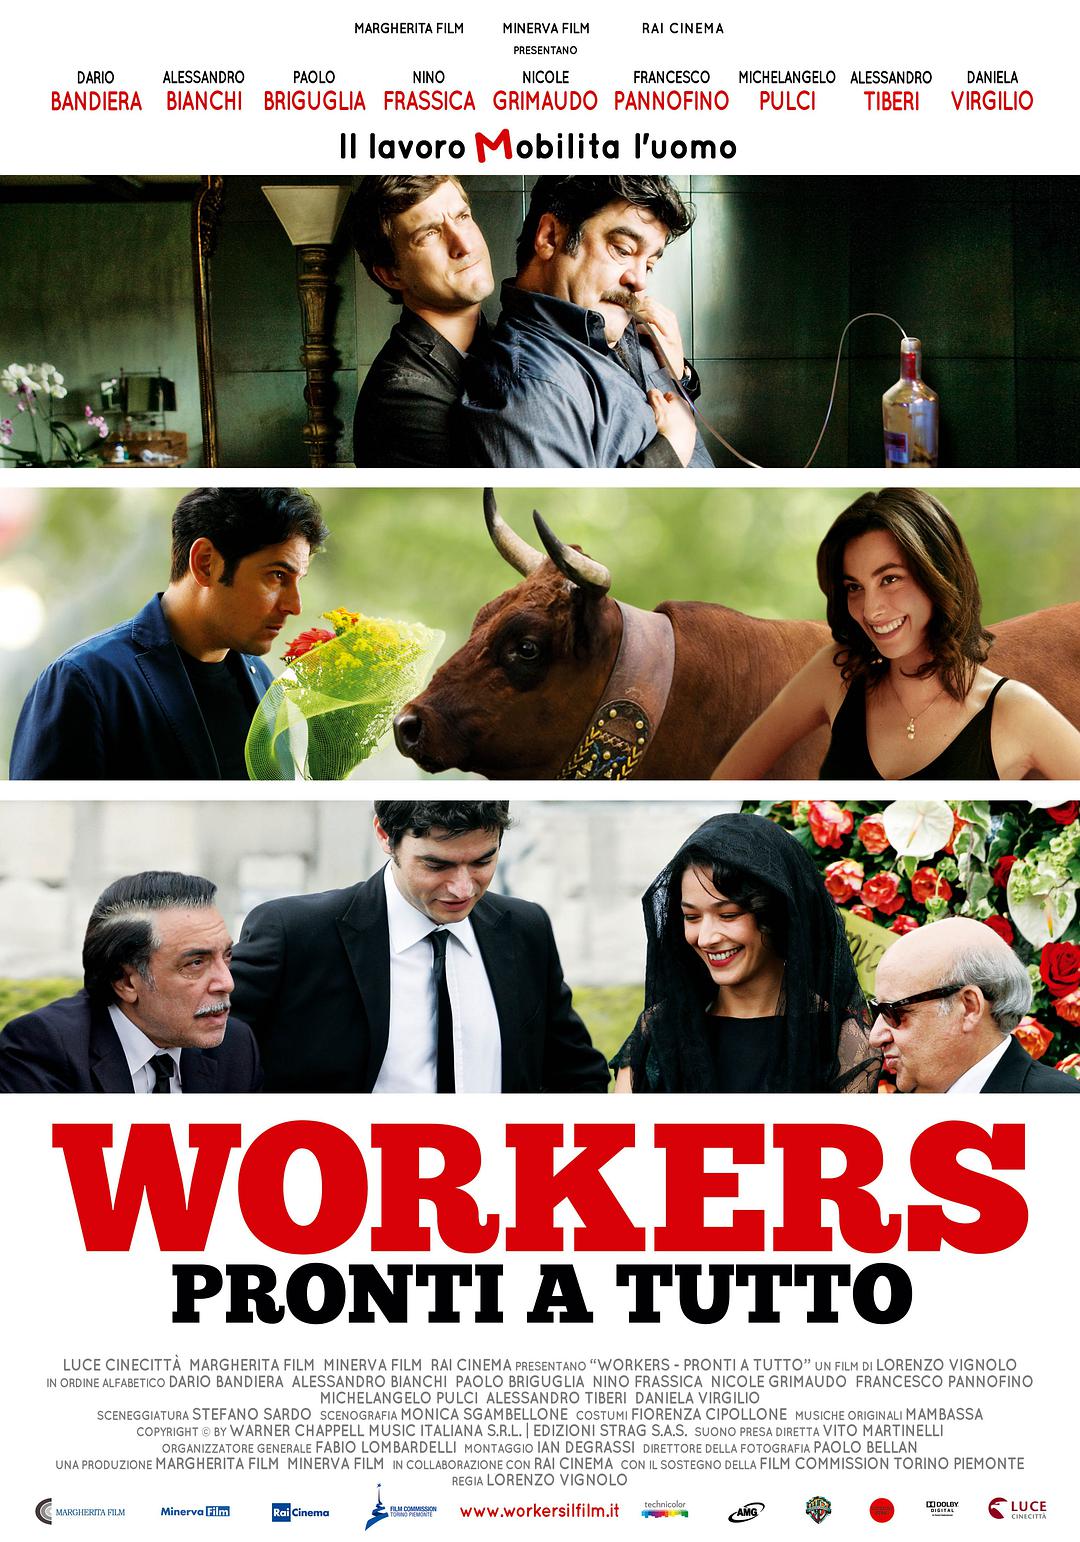 Employment agency story Workers - Pronti a tutto